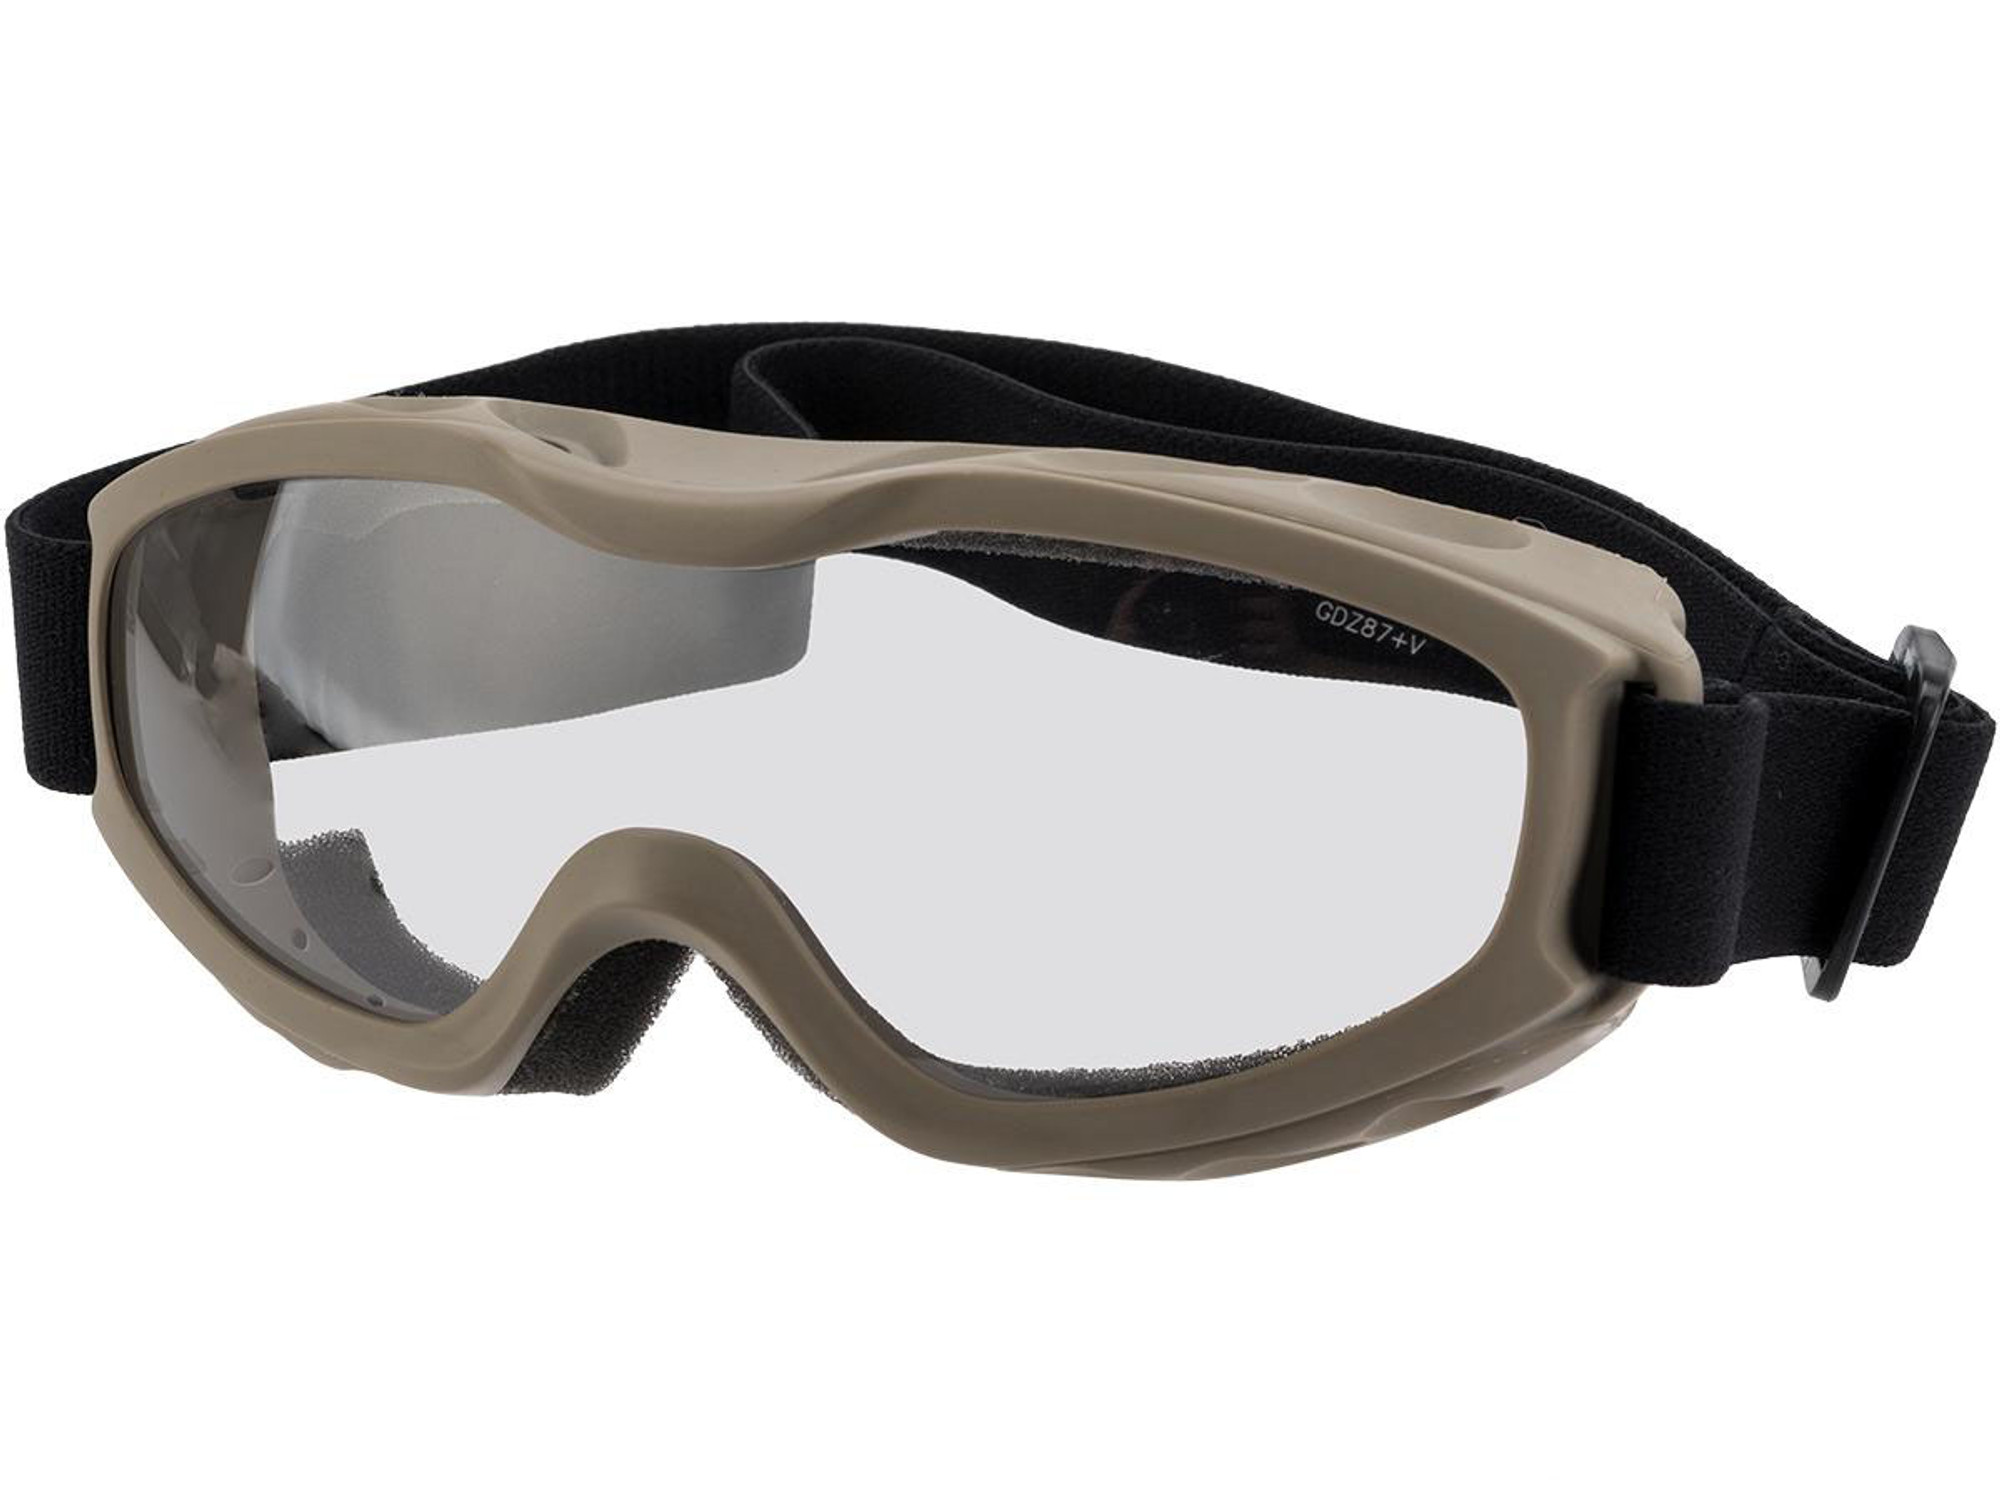 Guard-Dogs Evader II Changers FogStopper Goggles Full Seal (Color: Earth / Clear)